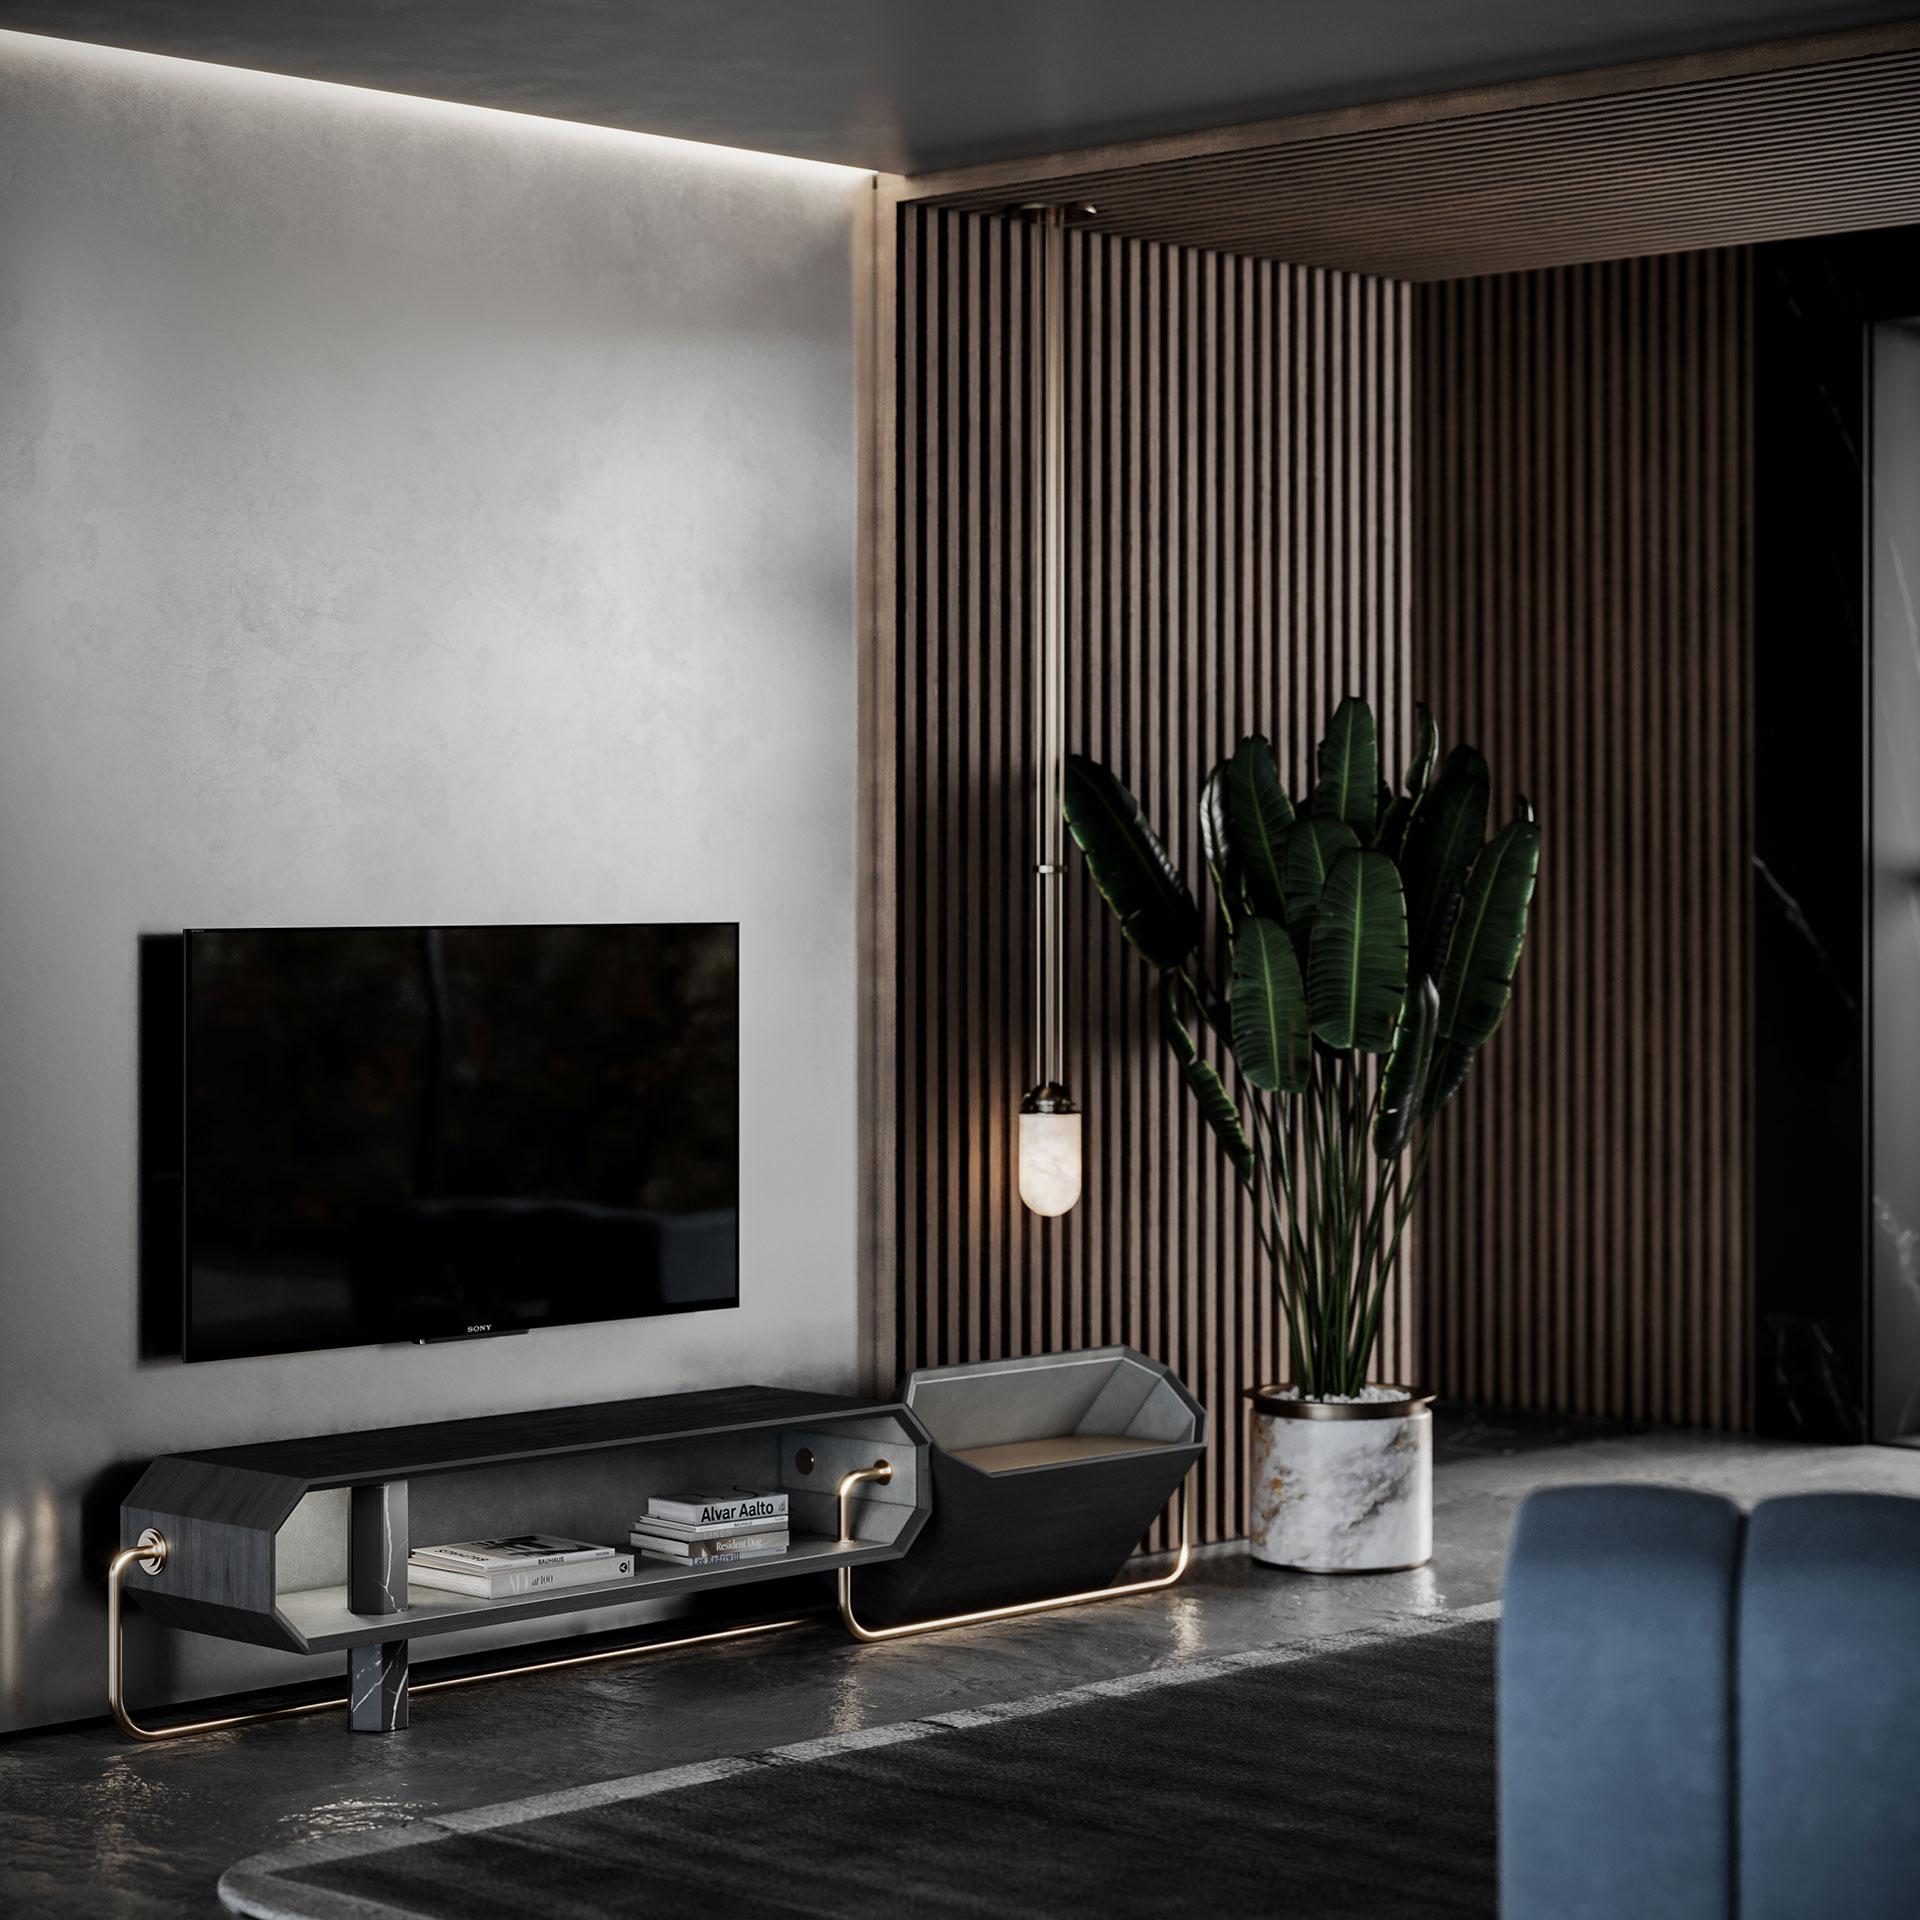 Transforming sights into deluxe living protagonists, Porus studio designers conceived the Orleans Tv Unit.
Geometric shapes come in black lacquered wood embracing Nero Marquina marble and brushed brass. The Tv unit enriches the entertainment